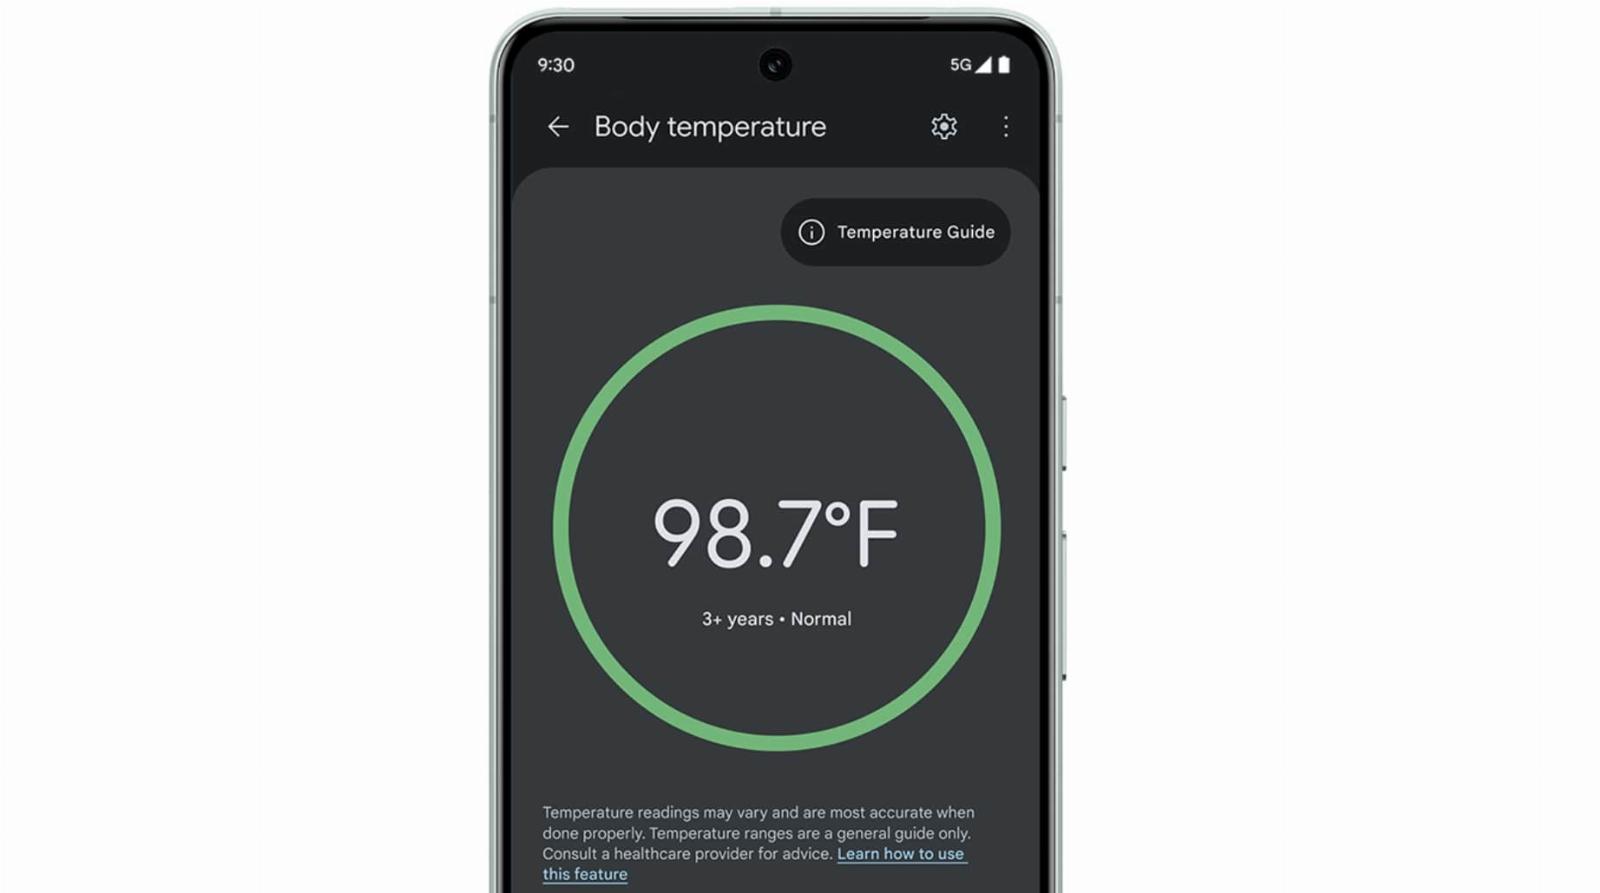 Pixel 8 Pro users can now use the Thermometer app to measure body temperature